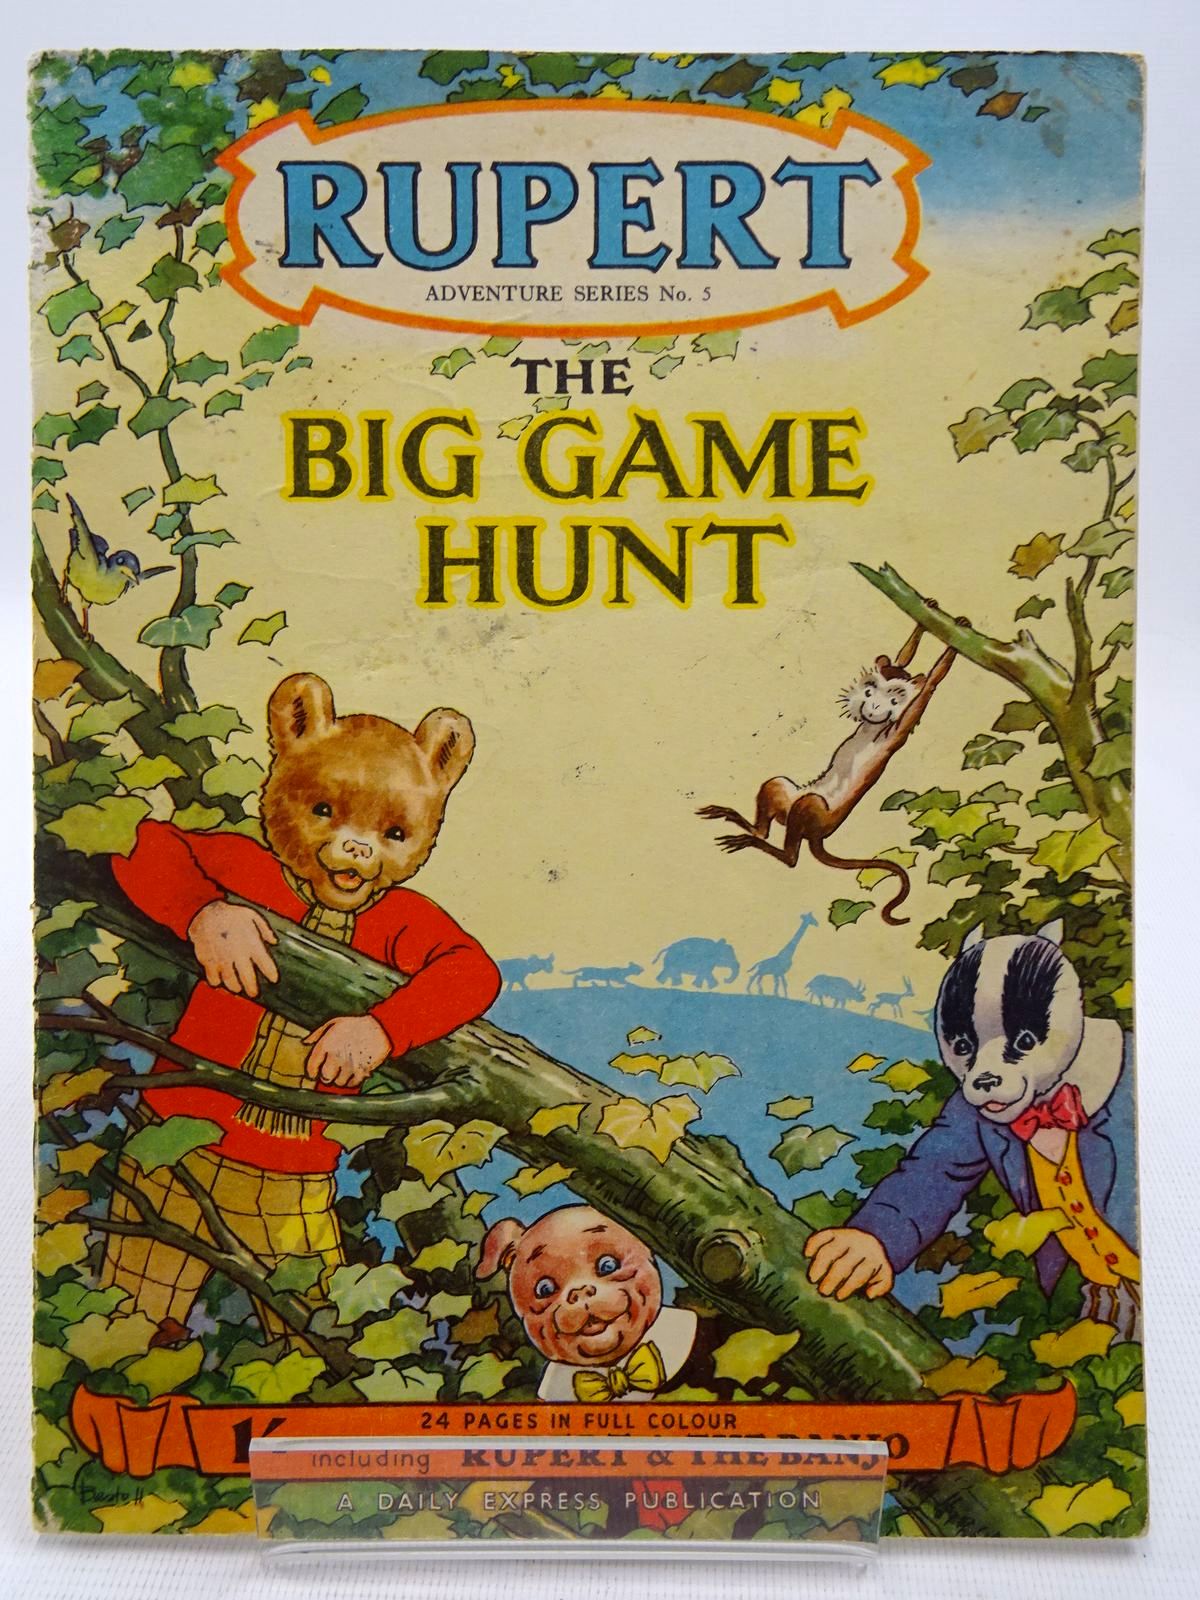 Photo of RUPERT ADVENTURE SERIES No. 5 - THE BIG GAME HUNT written by Bestall, Alfred illustrated by Bestall, Alfred published by Daily Express (STOCK CODE: 2128604)  for sale by Stella & Rose's Books